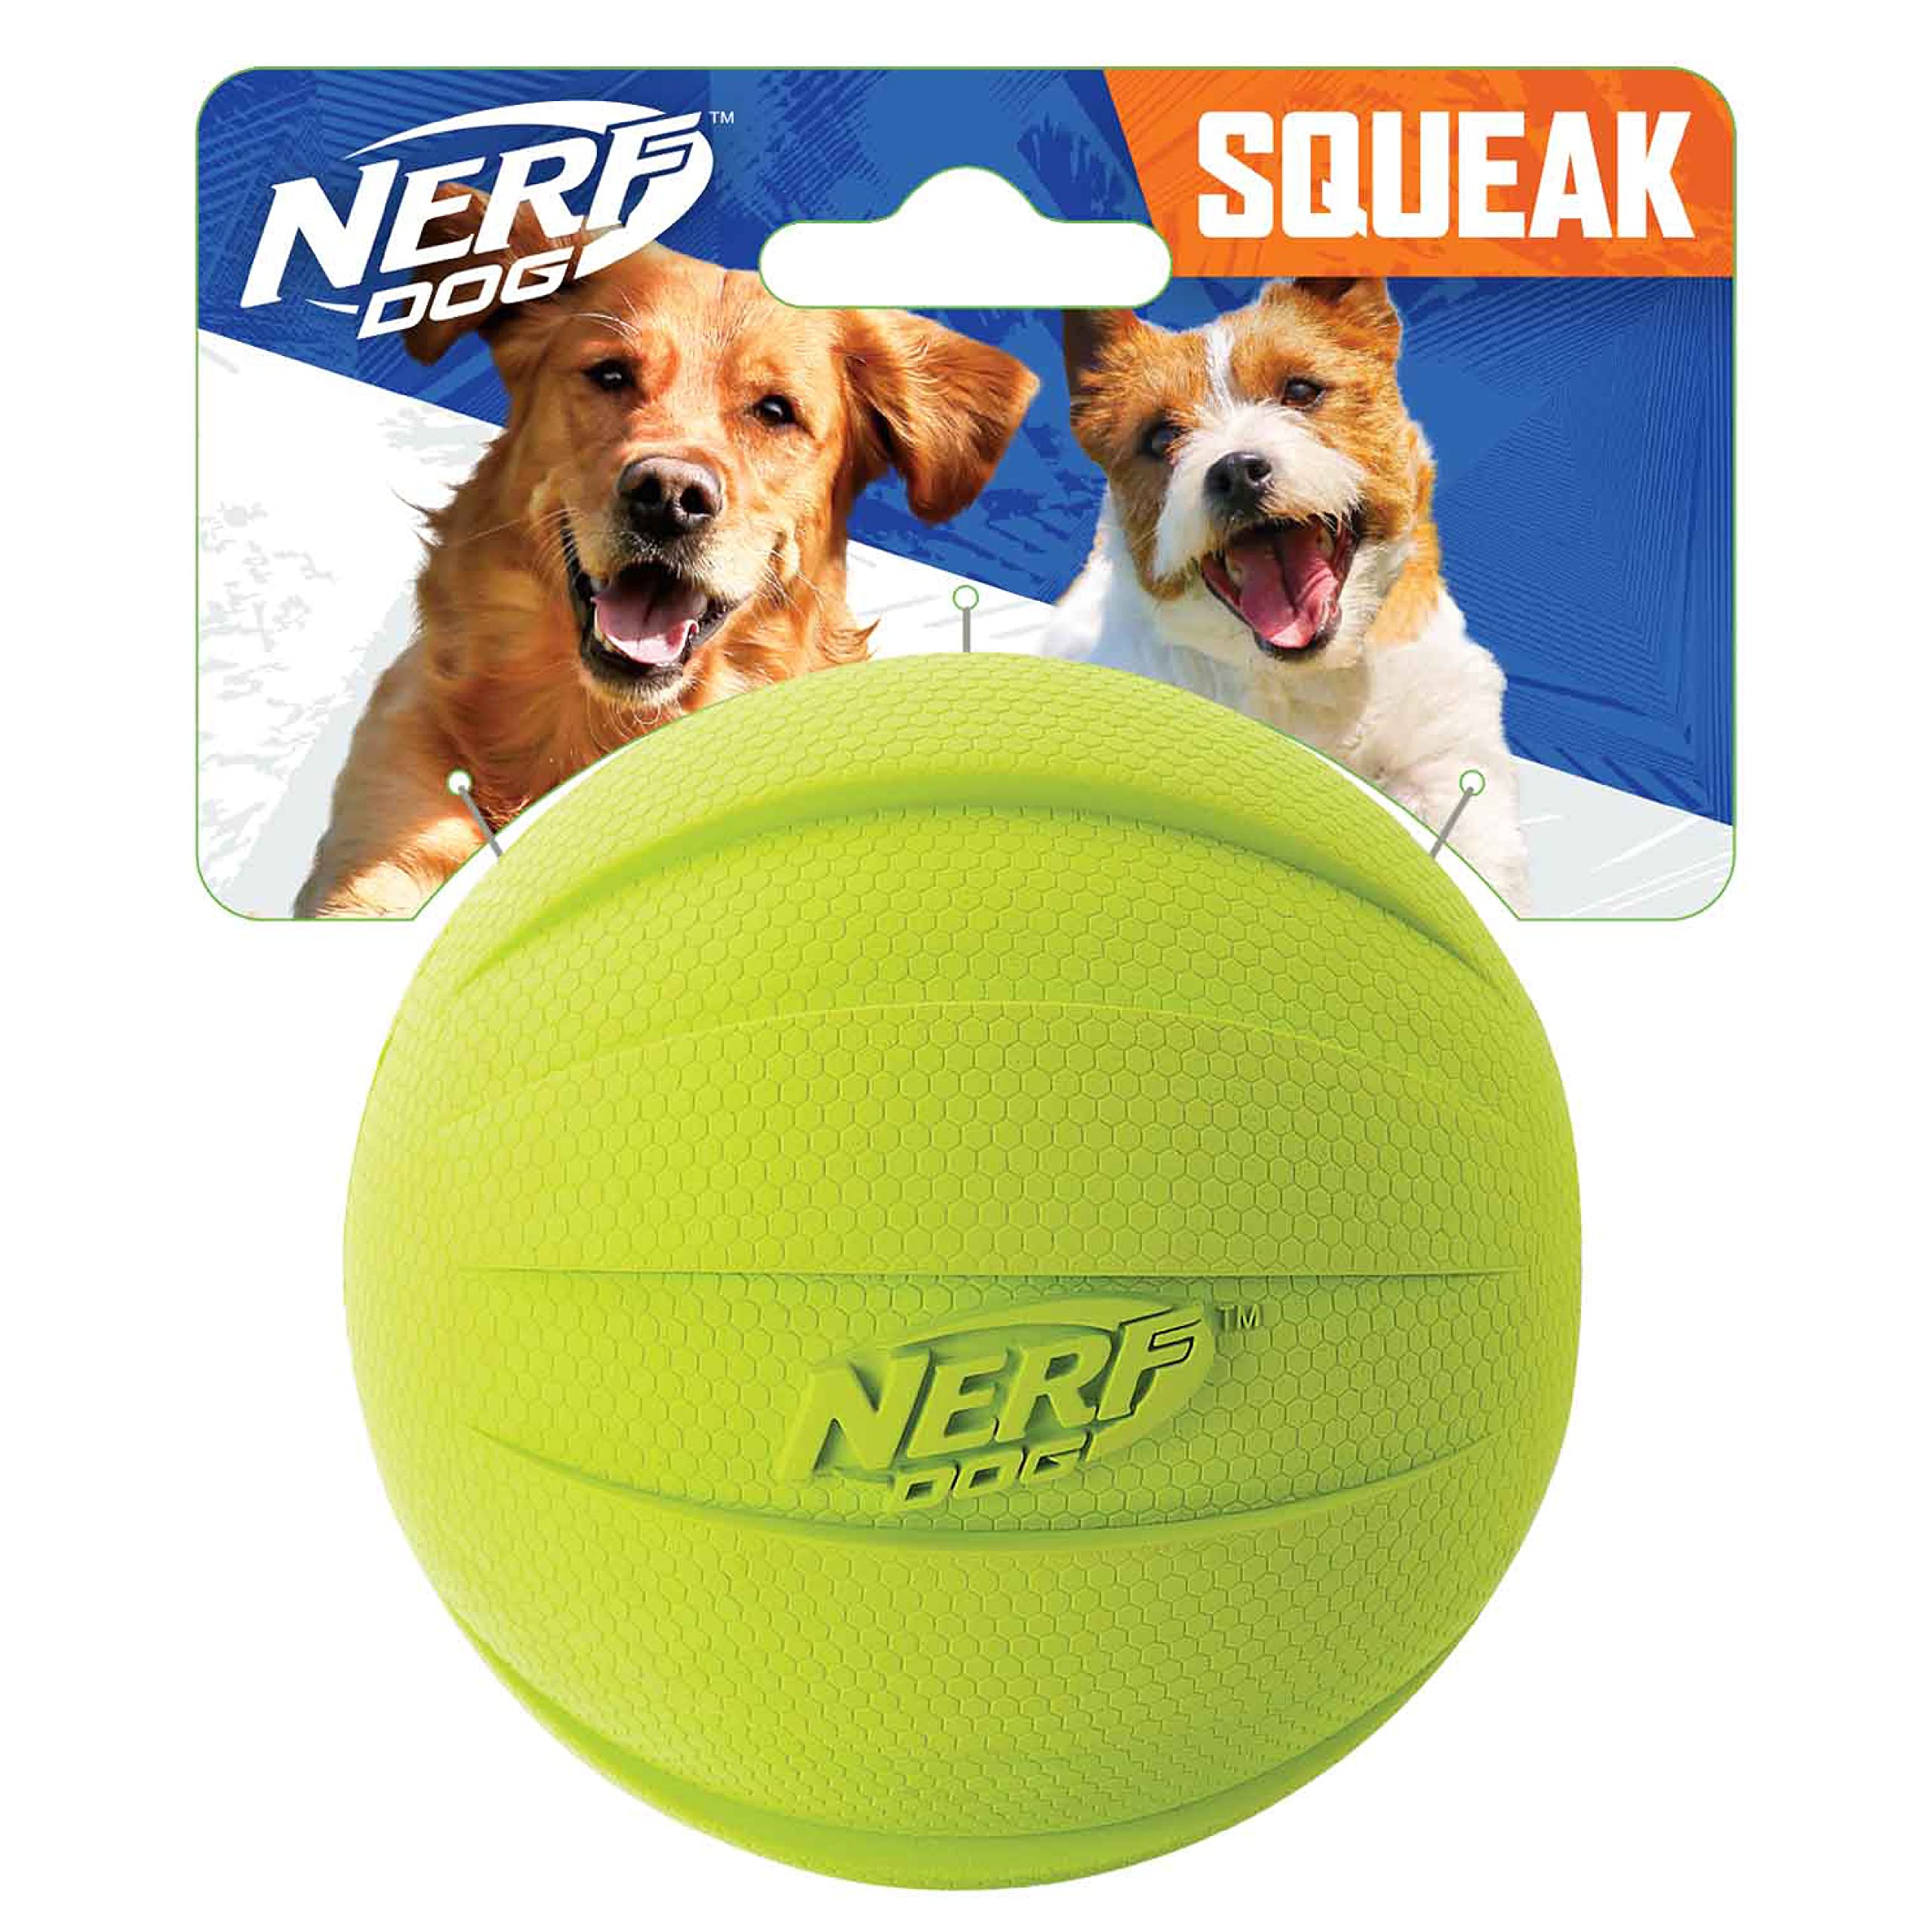 Nerf Dog Rubber Ball Dog Toy with Squeaker, Lightweight, Durable and Water Resistant, 4 Inch Diameter for Medium/Large Breeds, Single Unit, Green